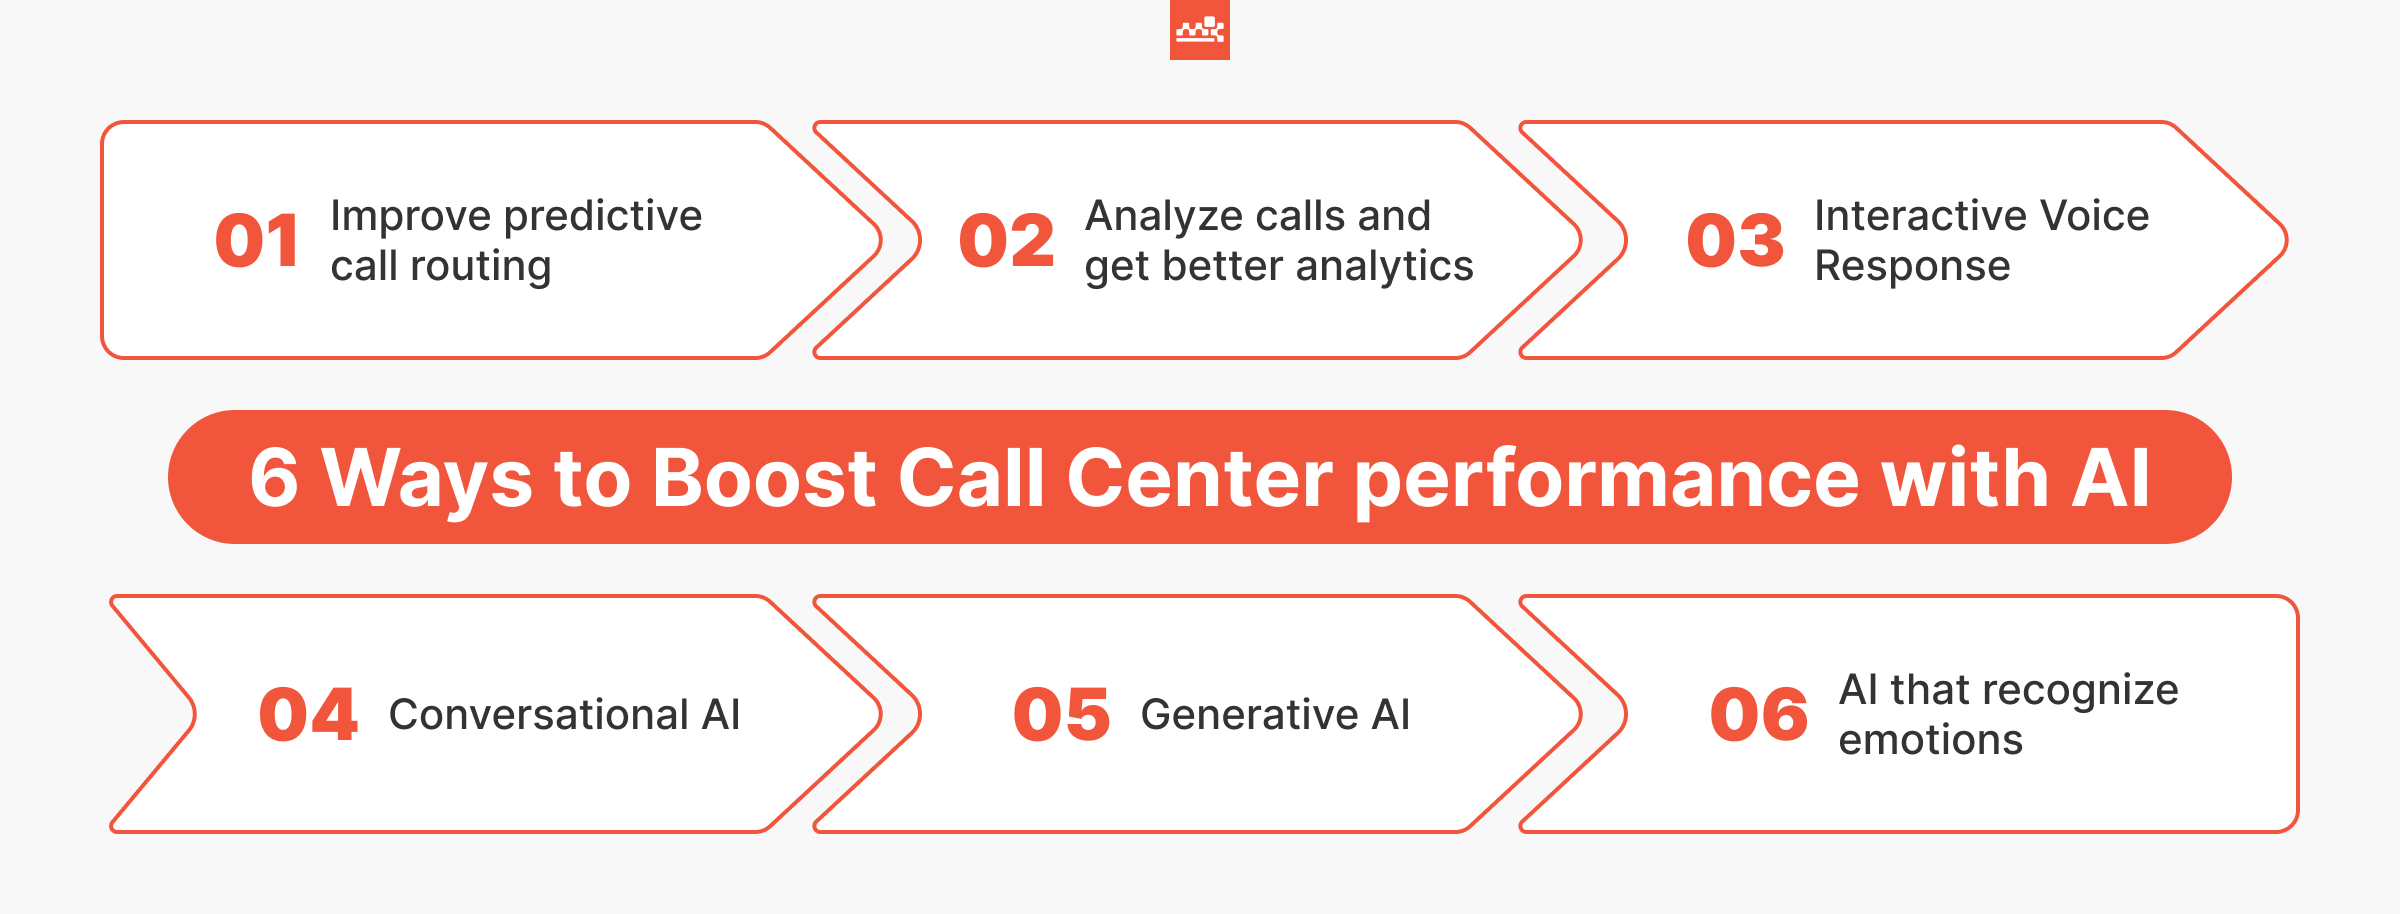 6 Ways to Boost Call Center performance with AI